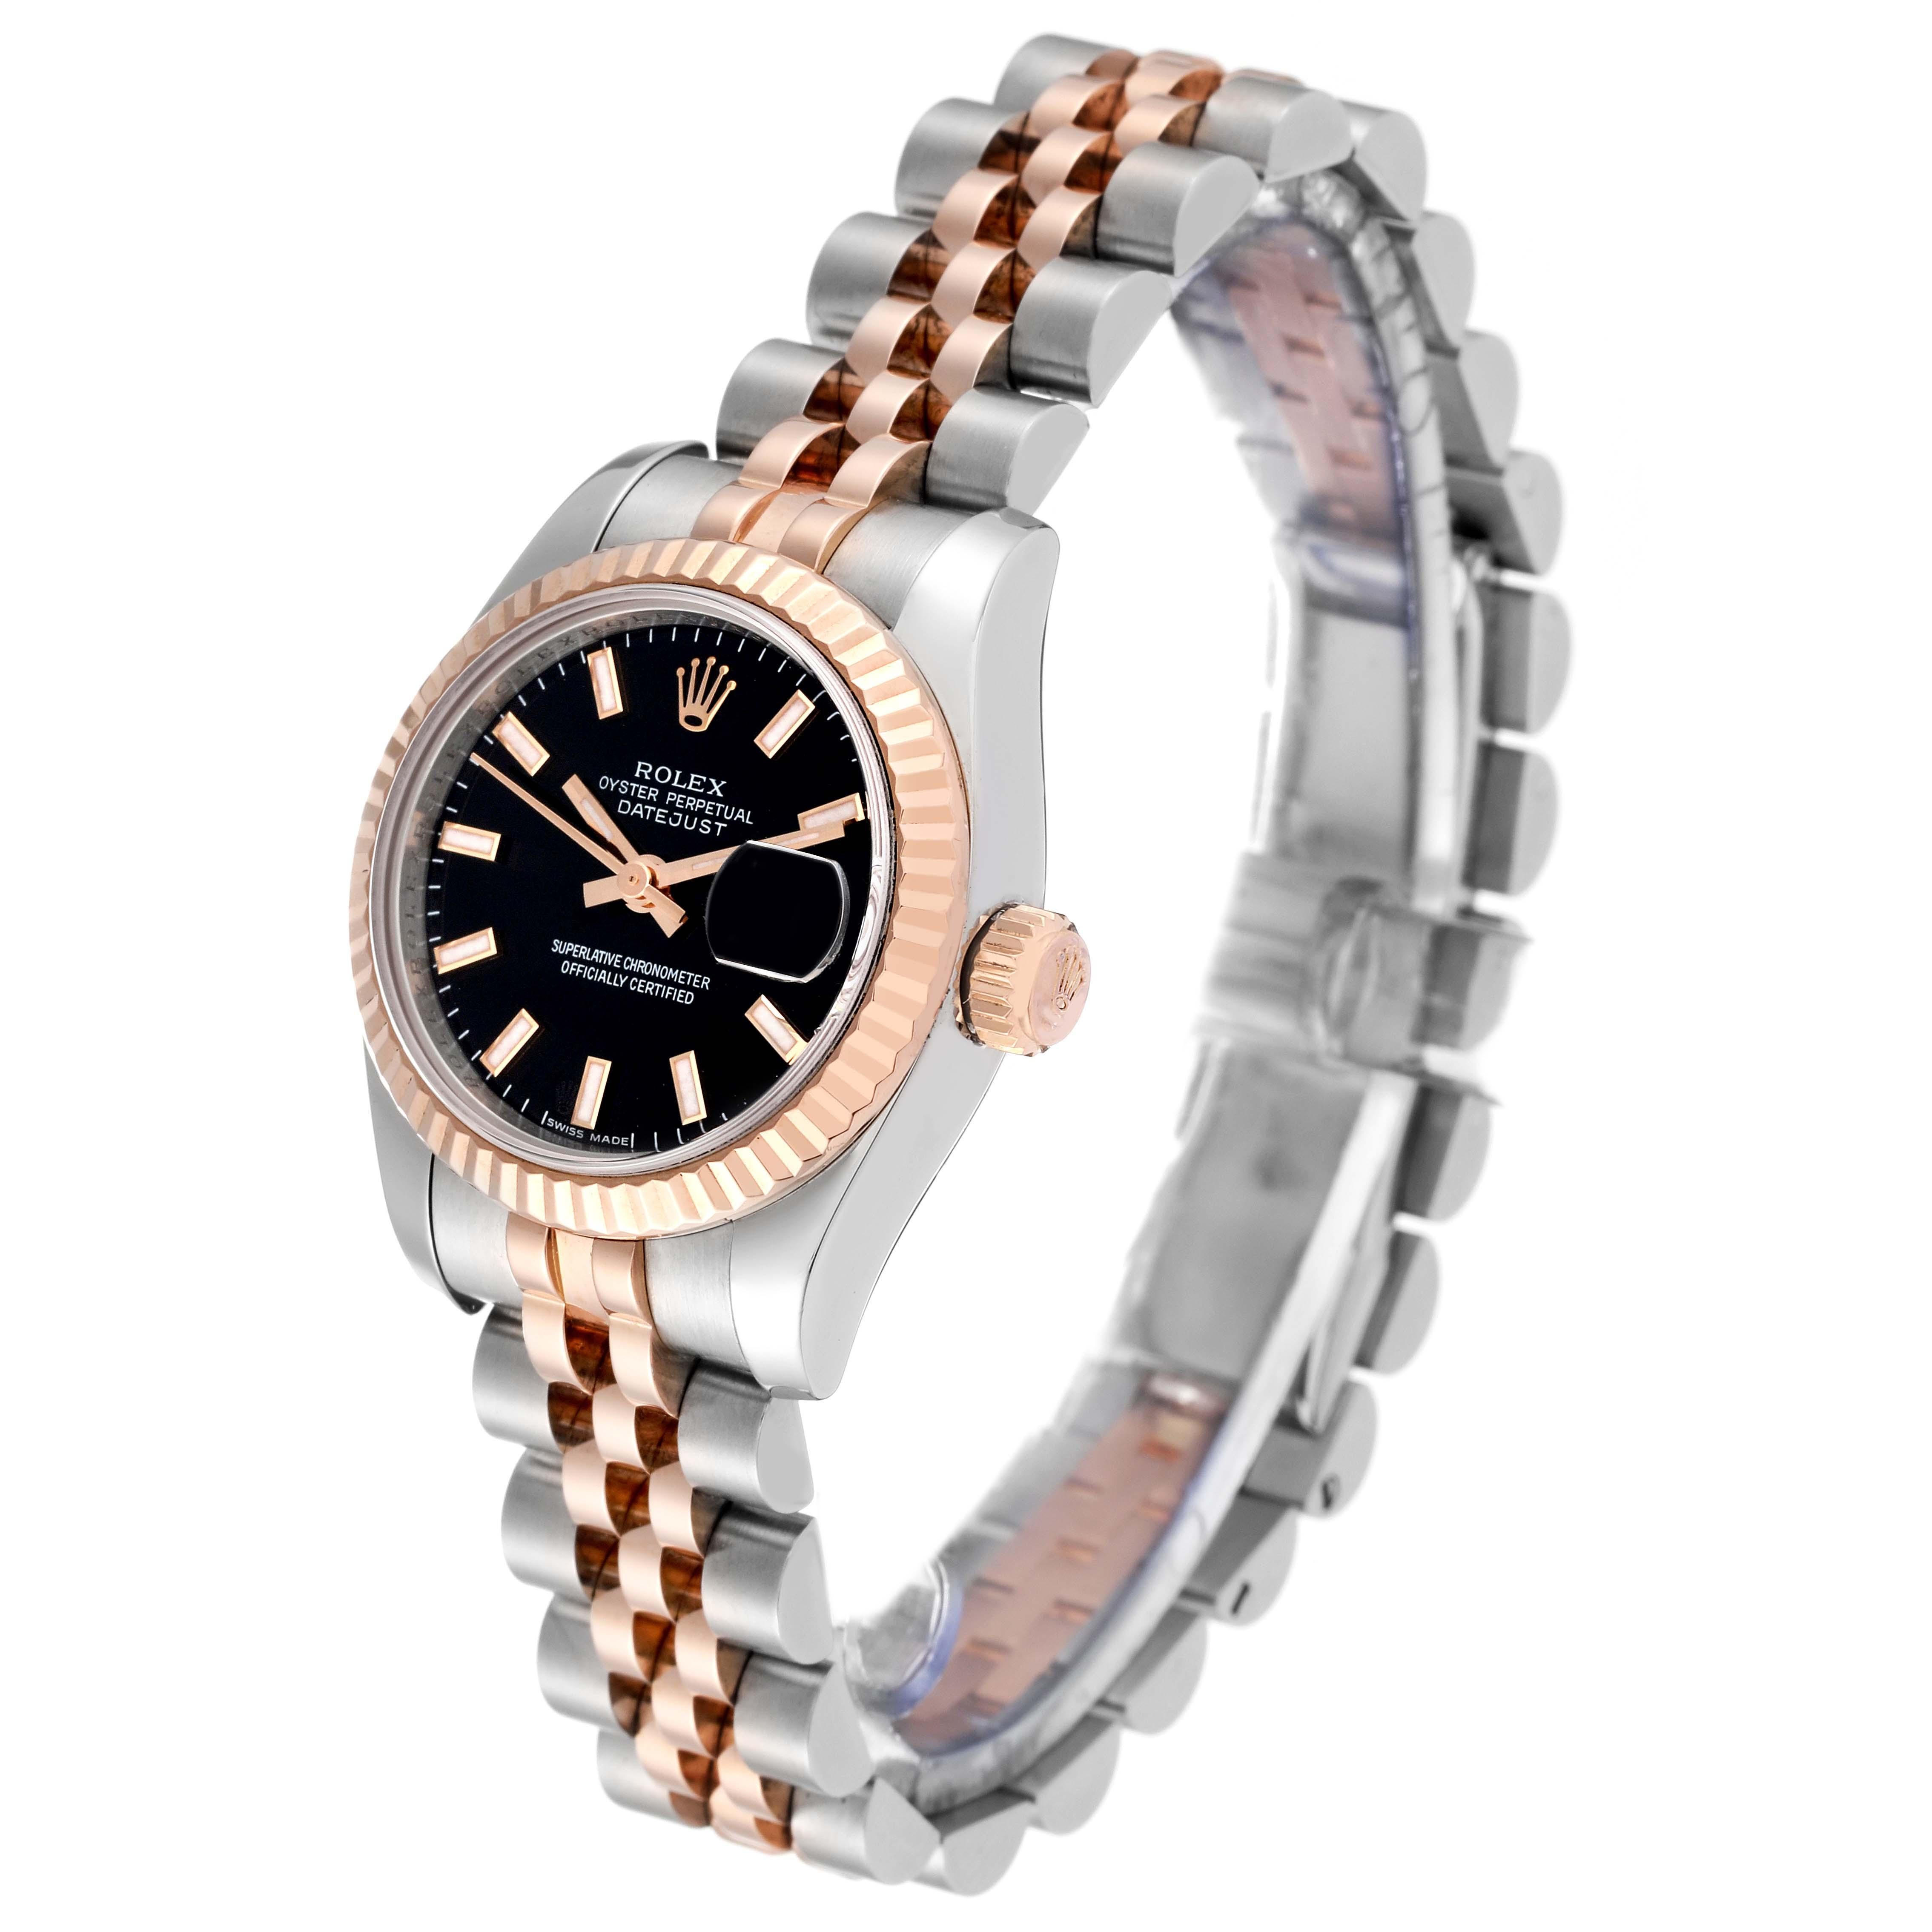 Women's Rolex Datejust Steel Rose Gold Black Dial Ladies Watch 179171 Box Card For Sale